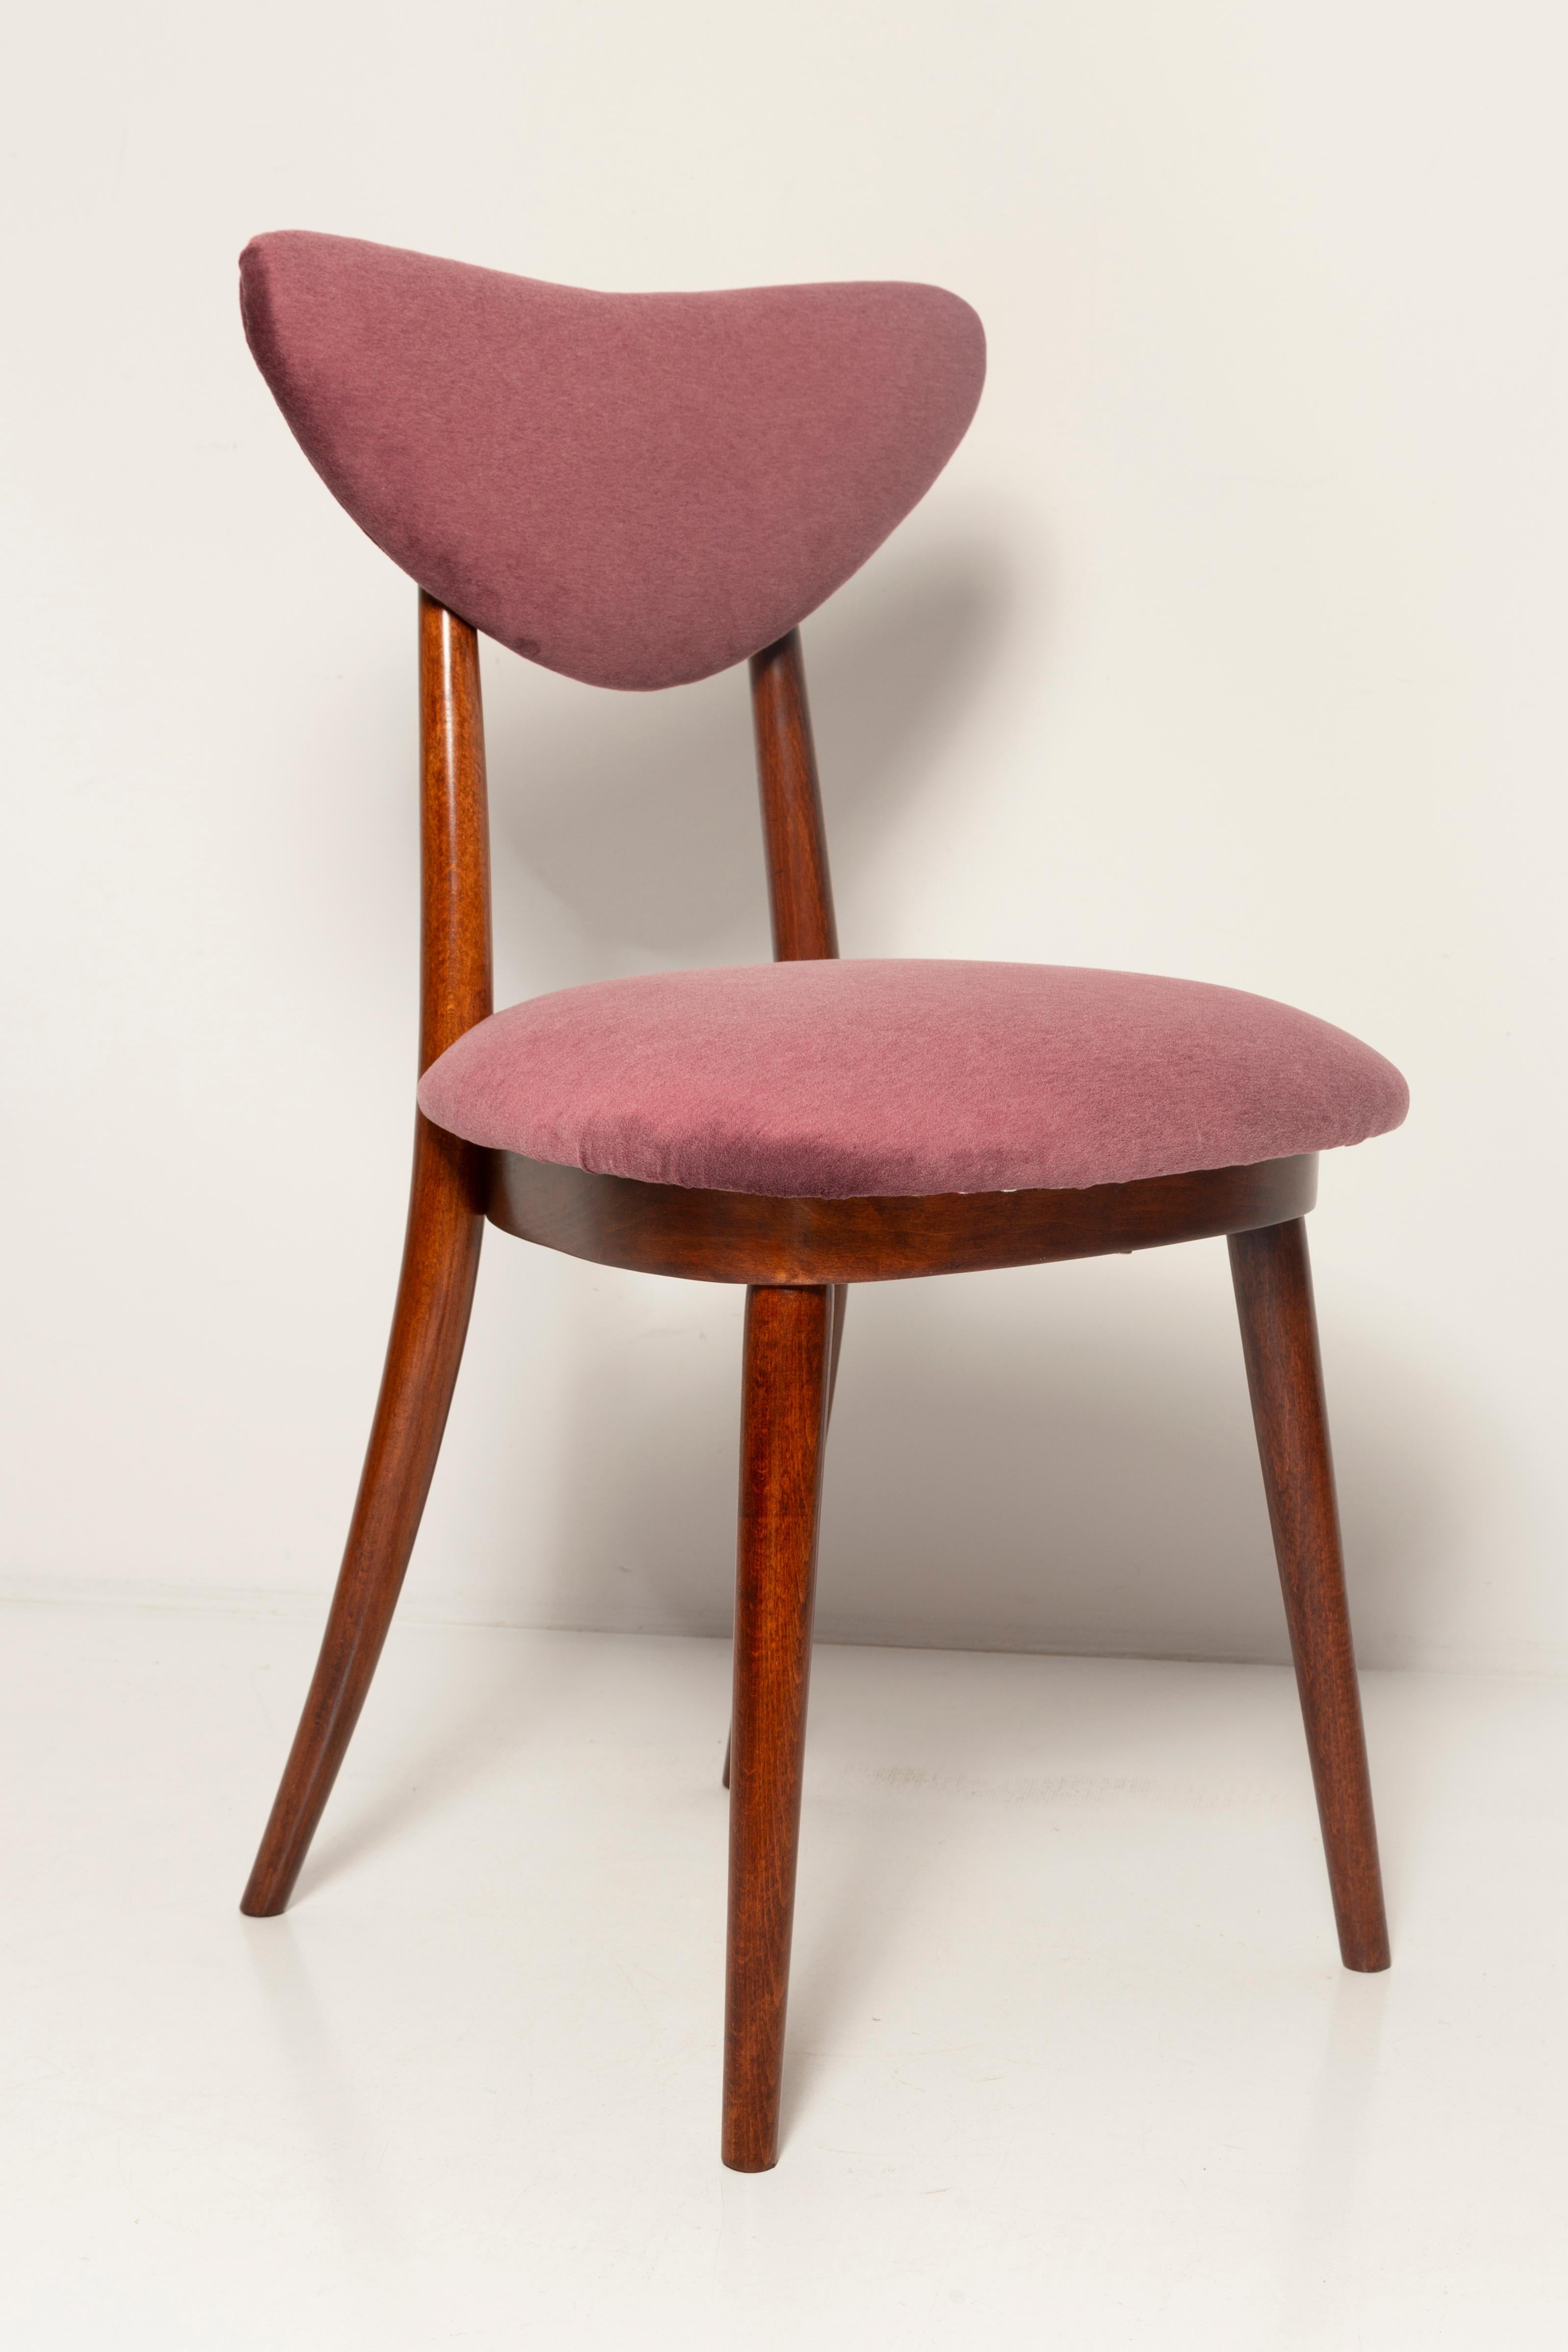 Hand-Crafted Set of Eight Midcentury Plum Violet Velvet Heart Chairs, Europe, 1960s For Sale